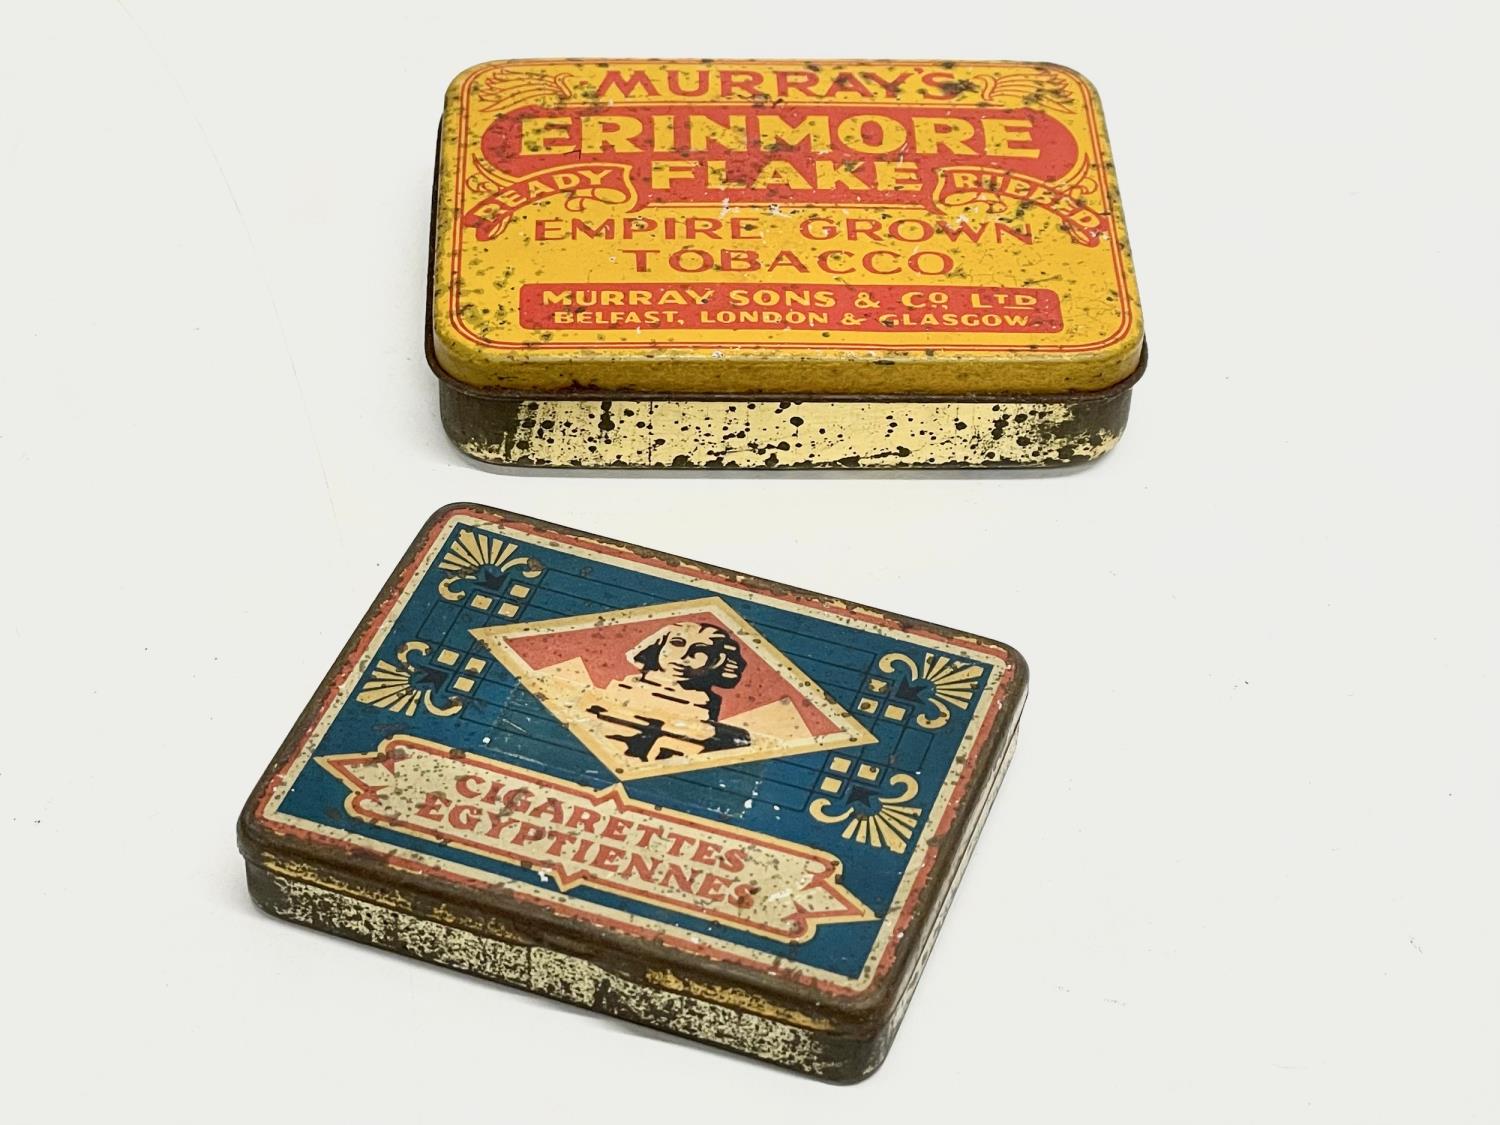 A vintage Beech-Nut Chewing Gum tin. A Murray’s Erinmore Flake Tobacco tin. Cigarettes Egyptiennes - Image 3 of 3